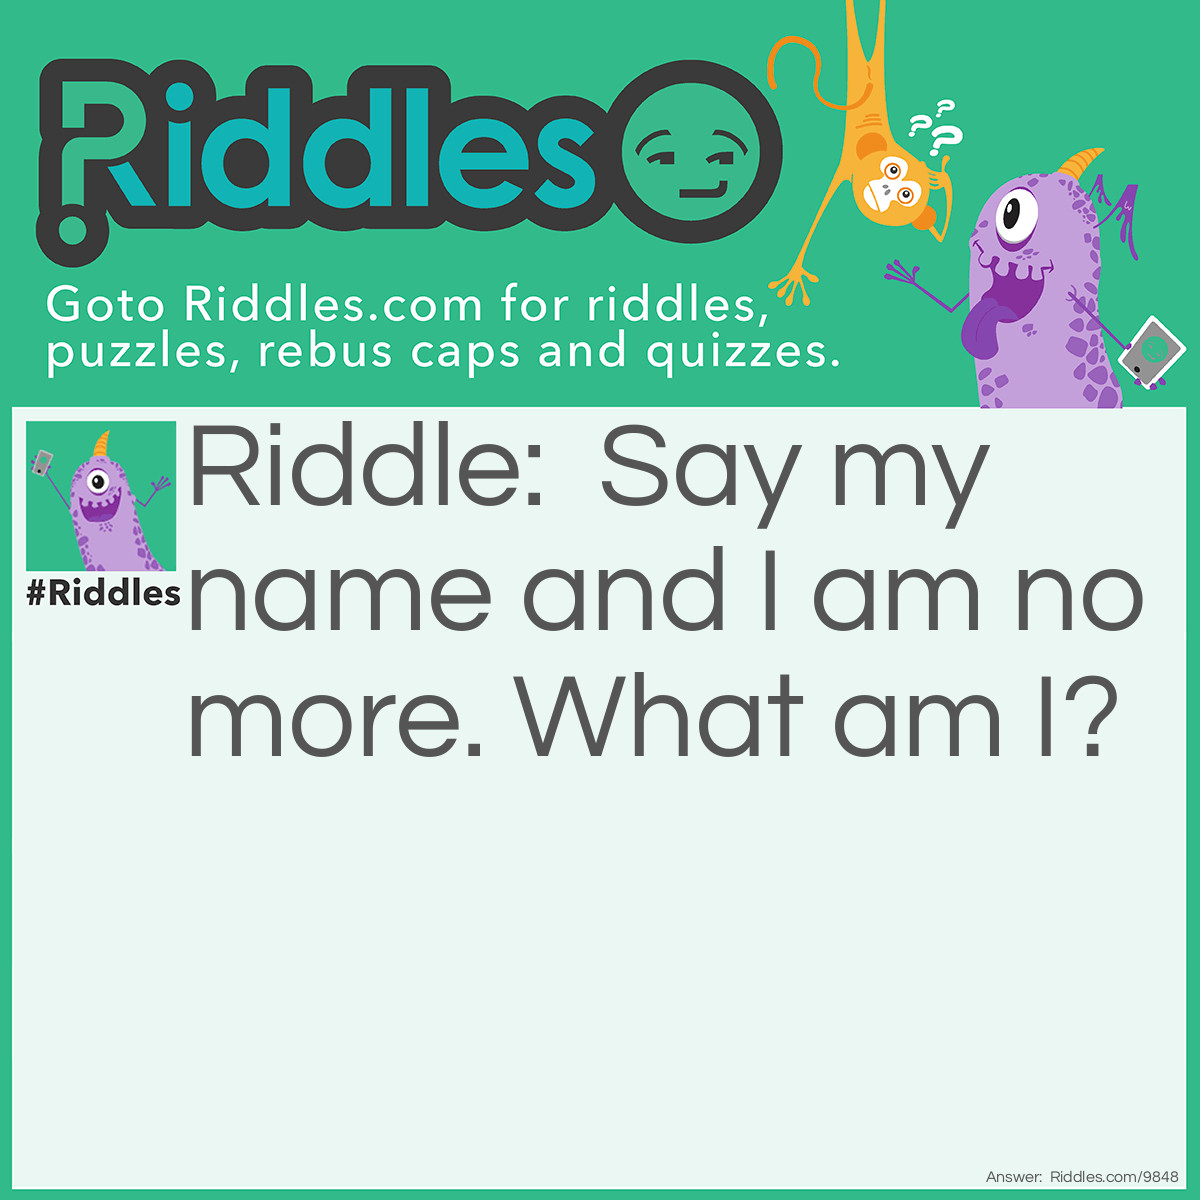 Riddle: Say my name and I am no more. What am I? Answer: Silence